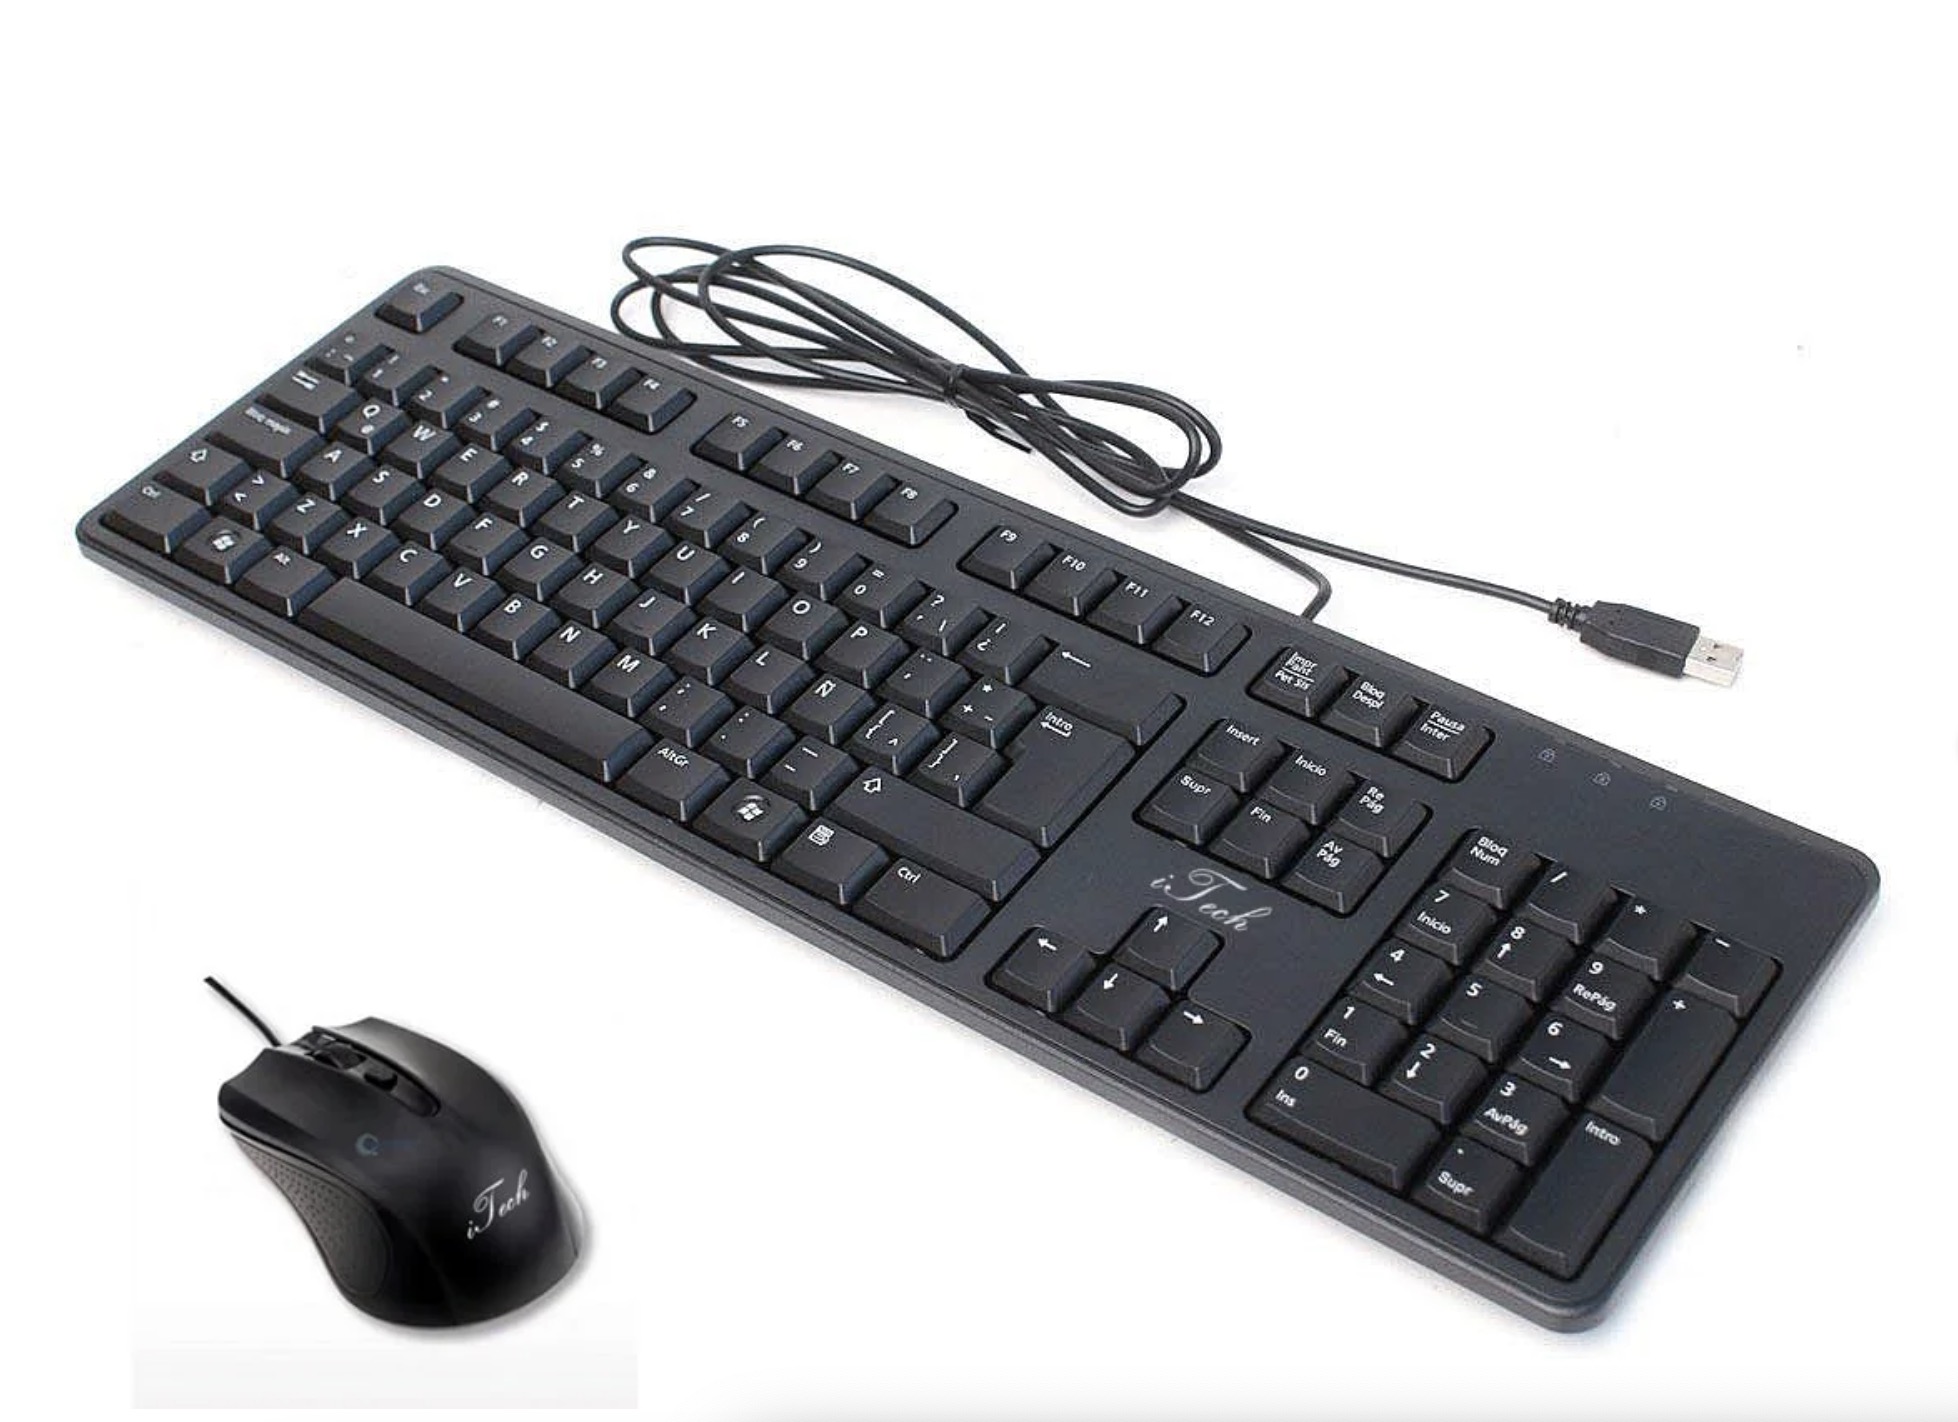 iTech USB Wired Computer Keyboard and Wired Mouse Bundle Pack - Black - English